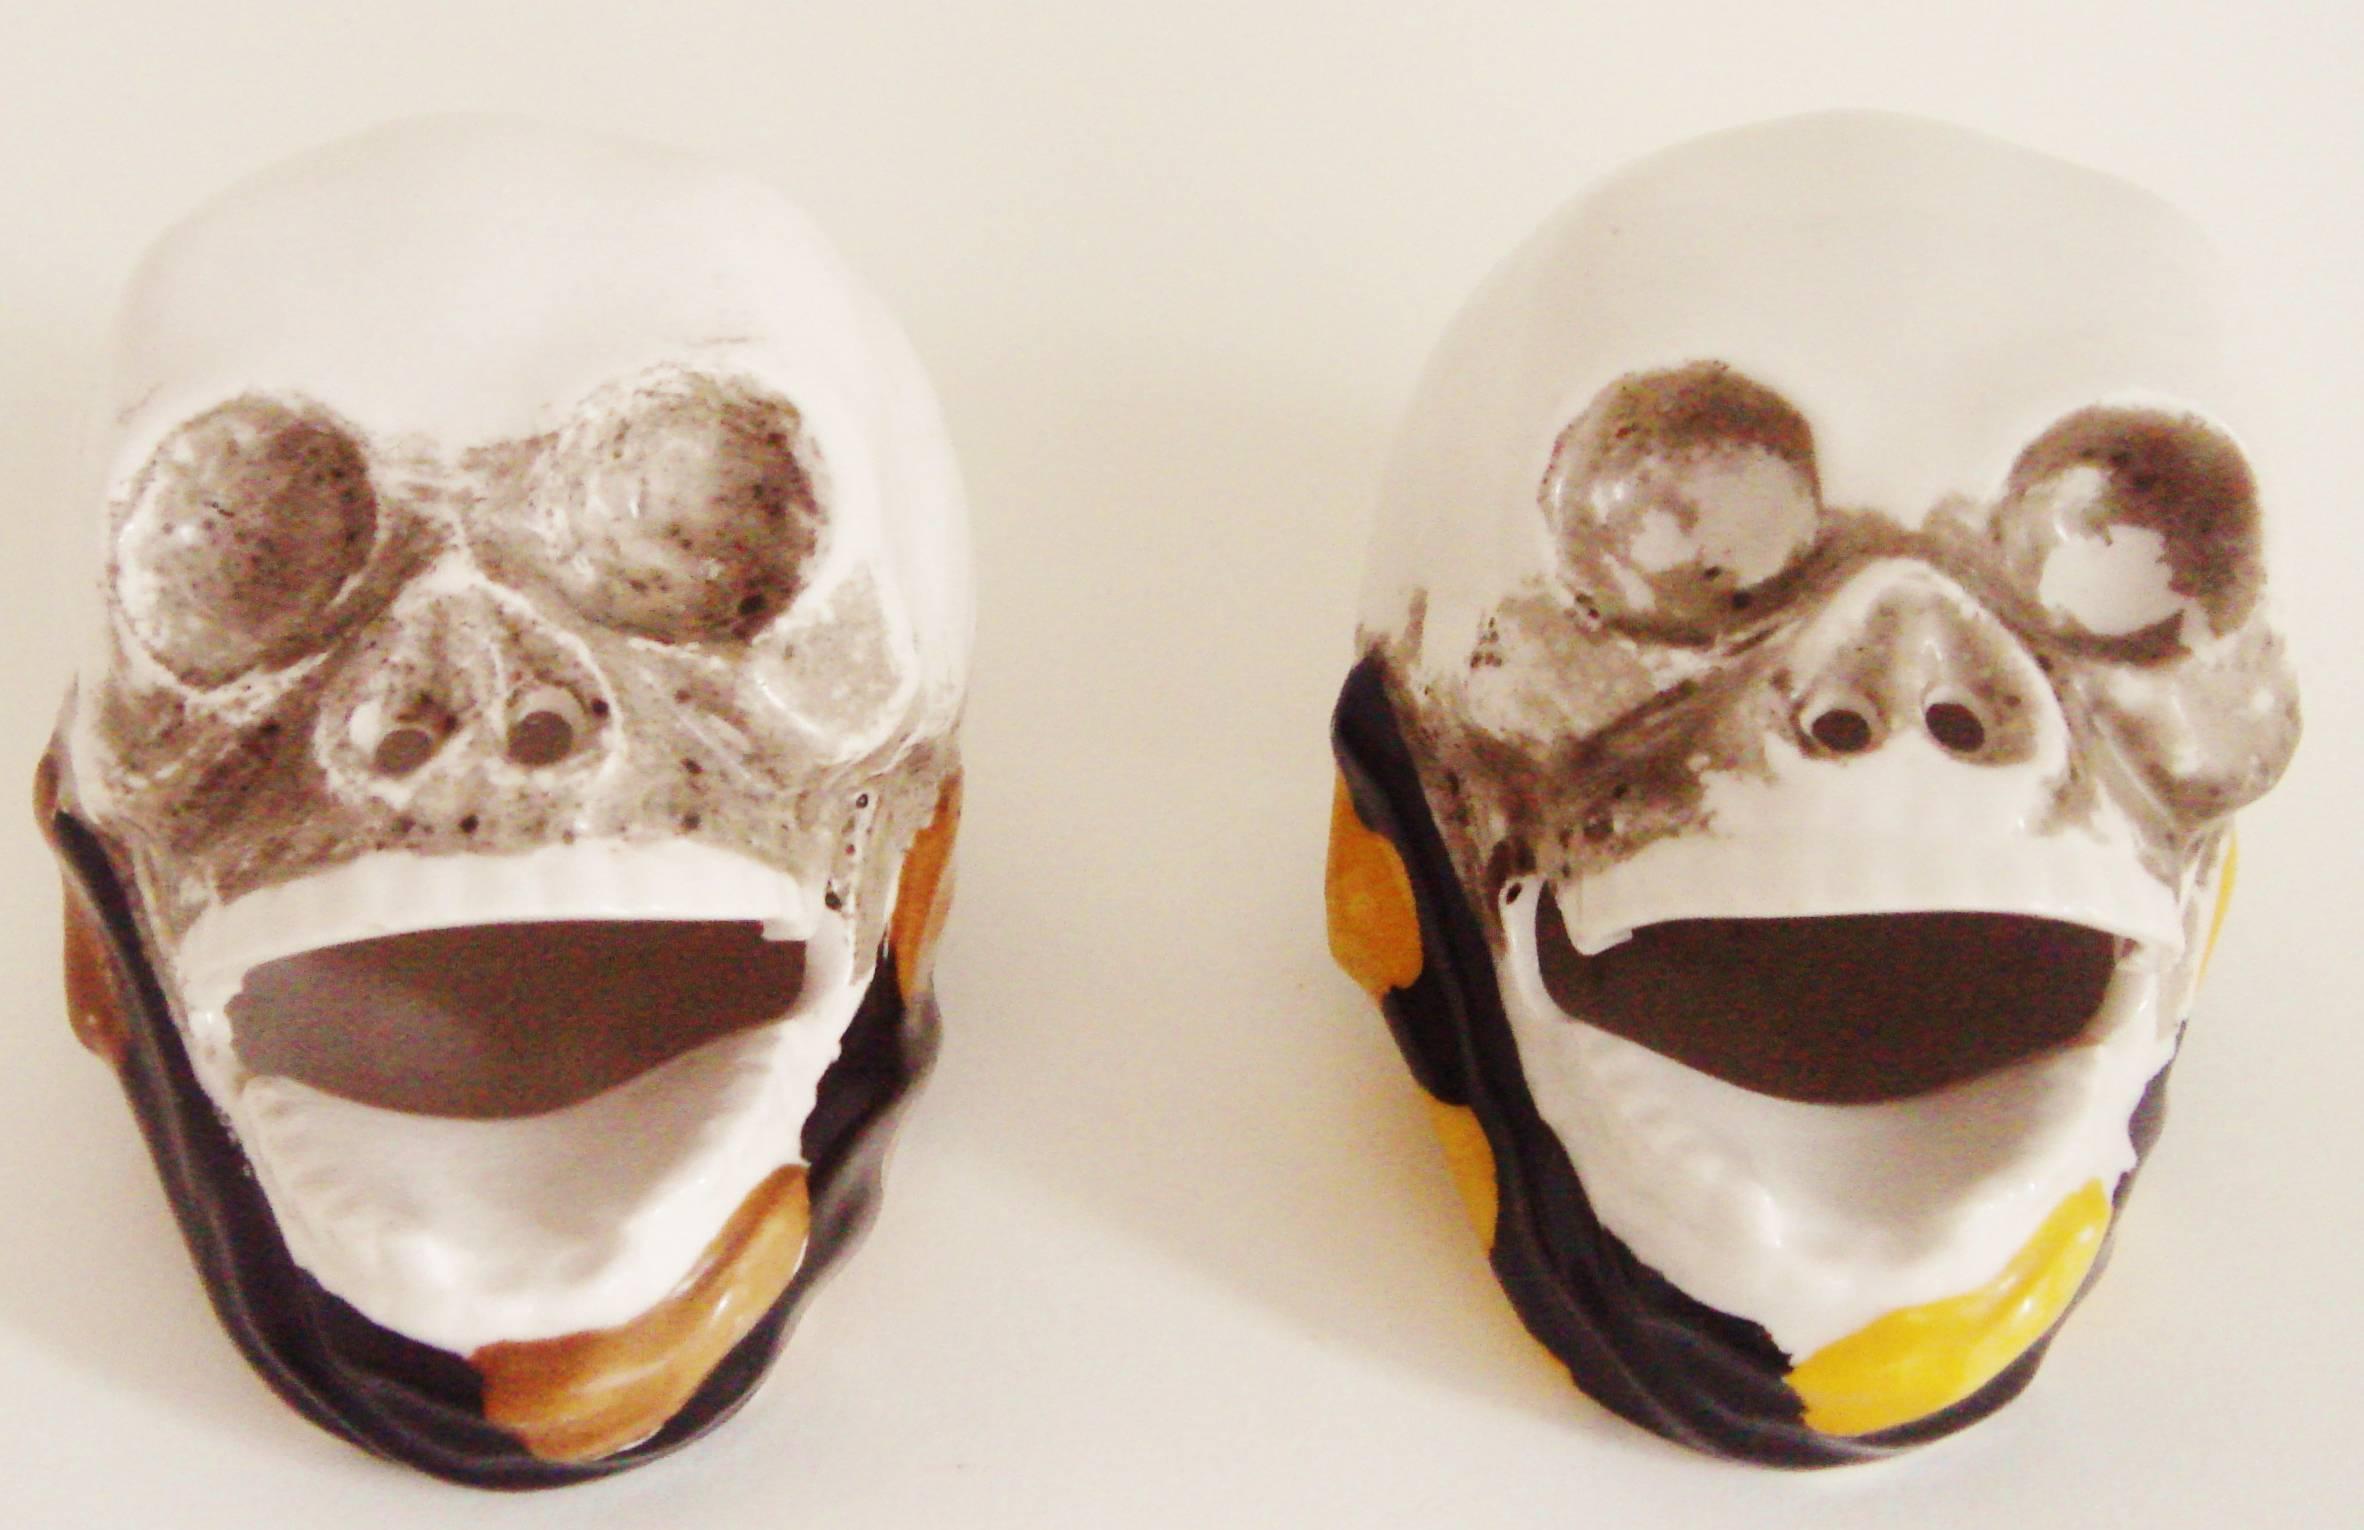 Mid-Century Modern Pair of Japanese Mid-Century Skull Ashtrays by Shafford Hand Decorated China.